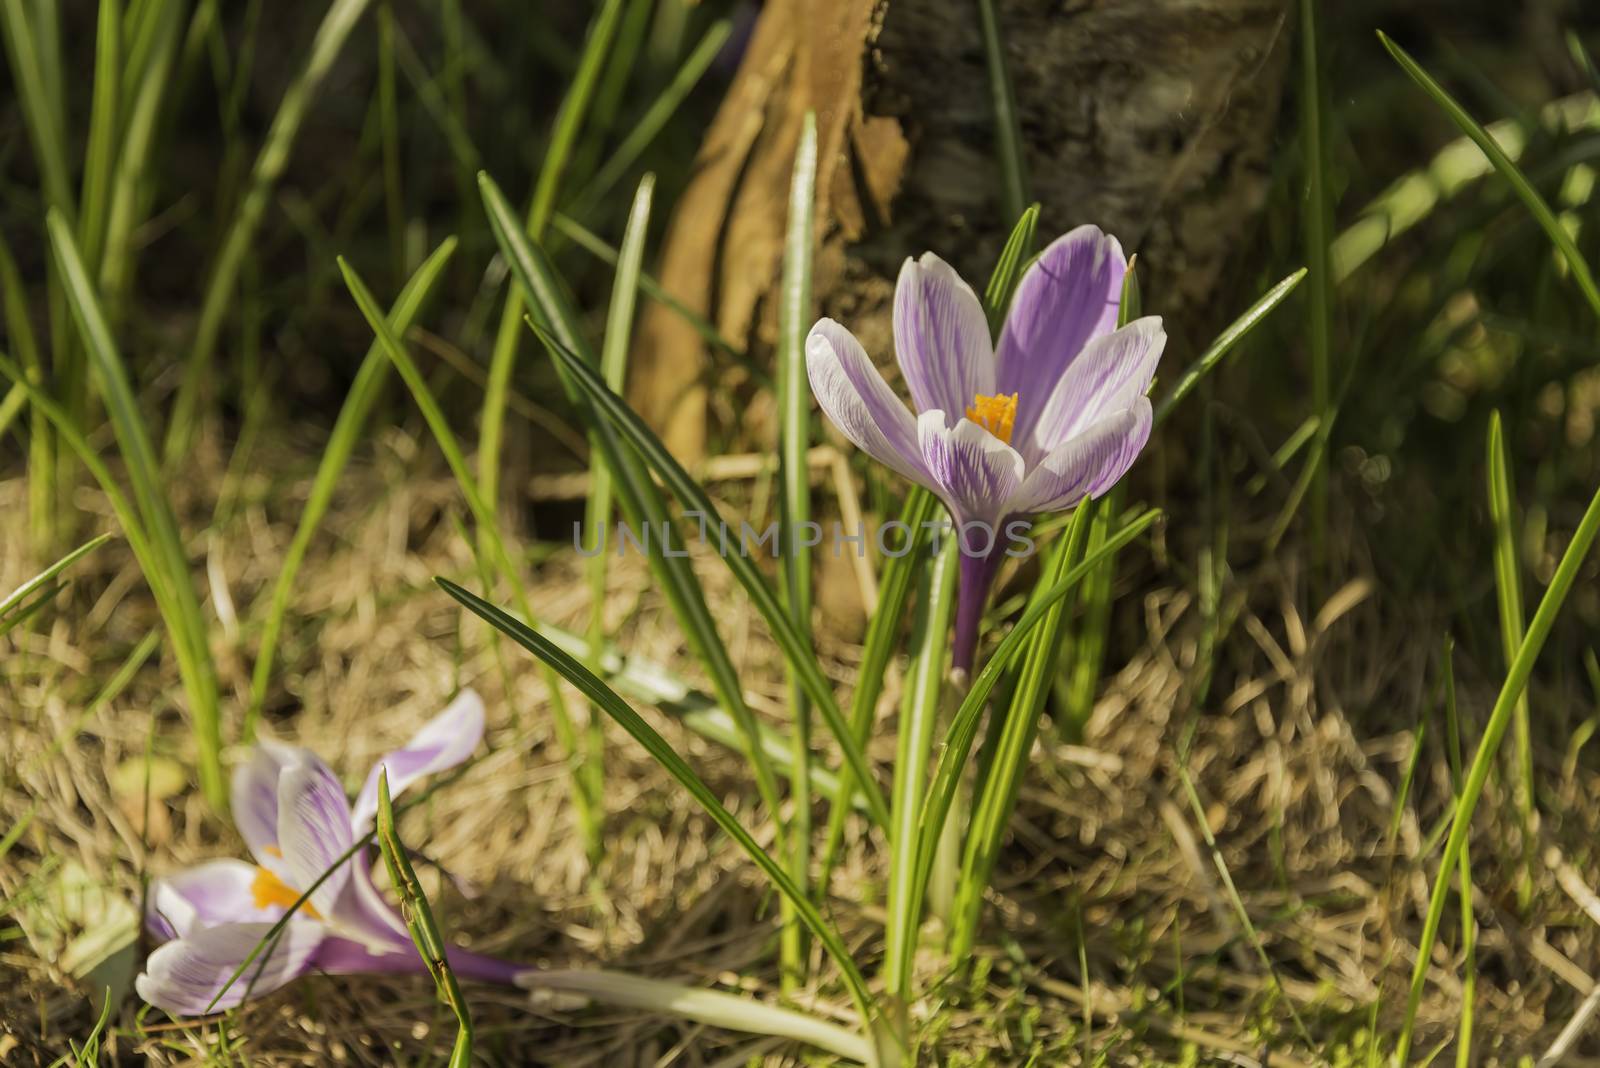 A purple crocus is withered and lying on the ground.  Another crocus is vital and blooming. Life and death